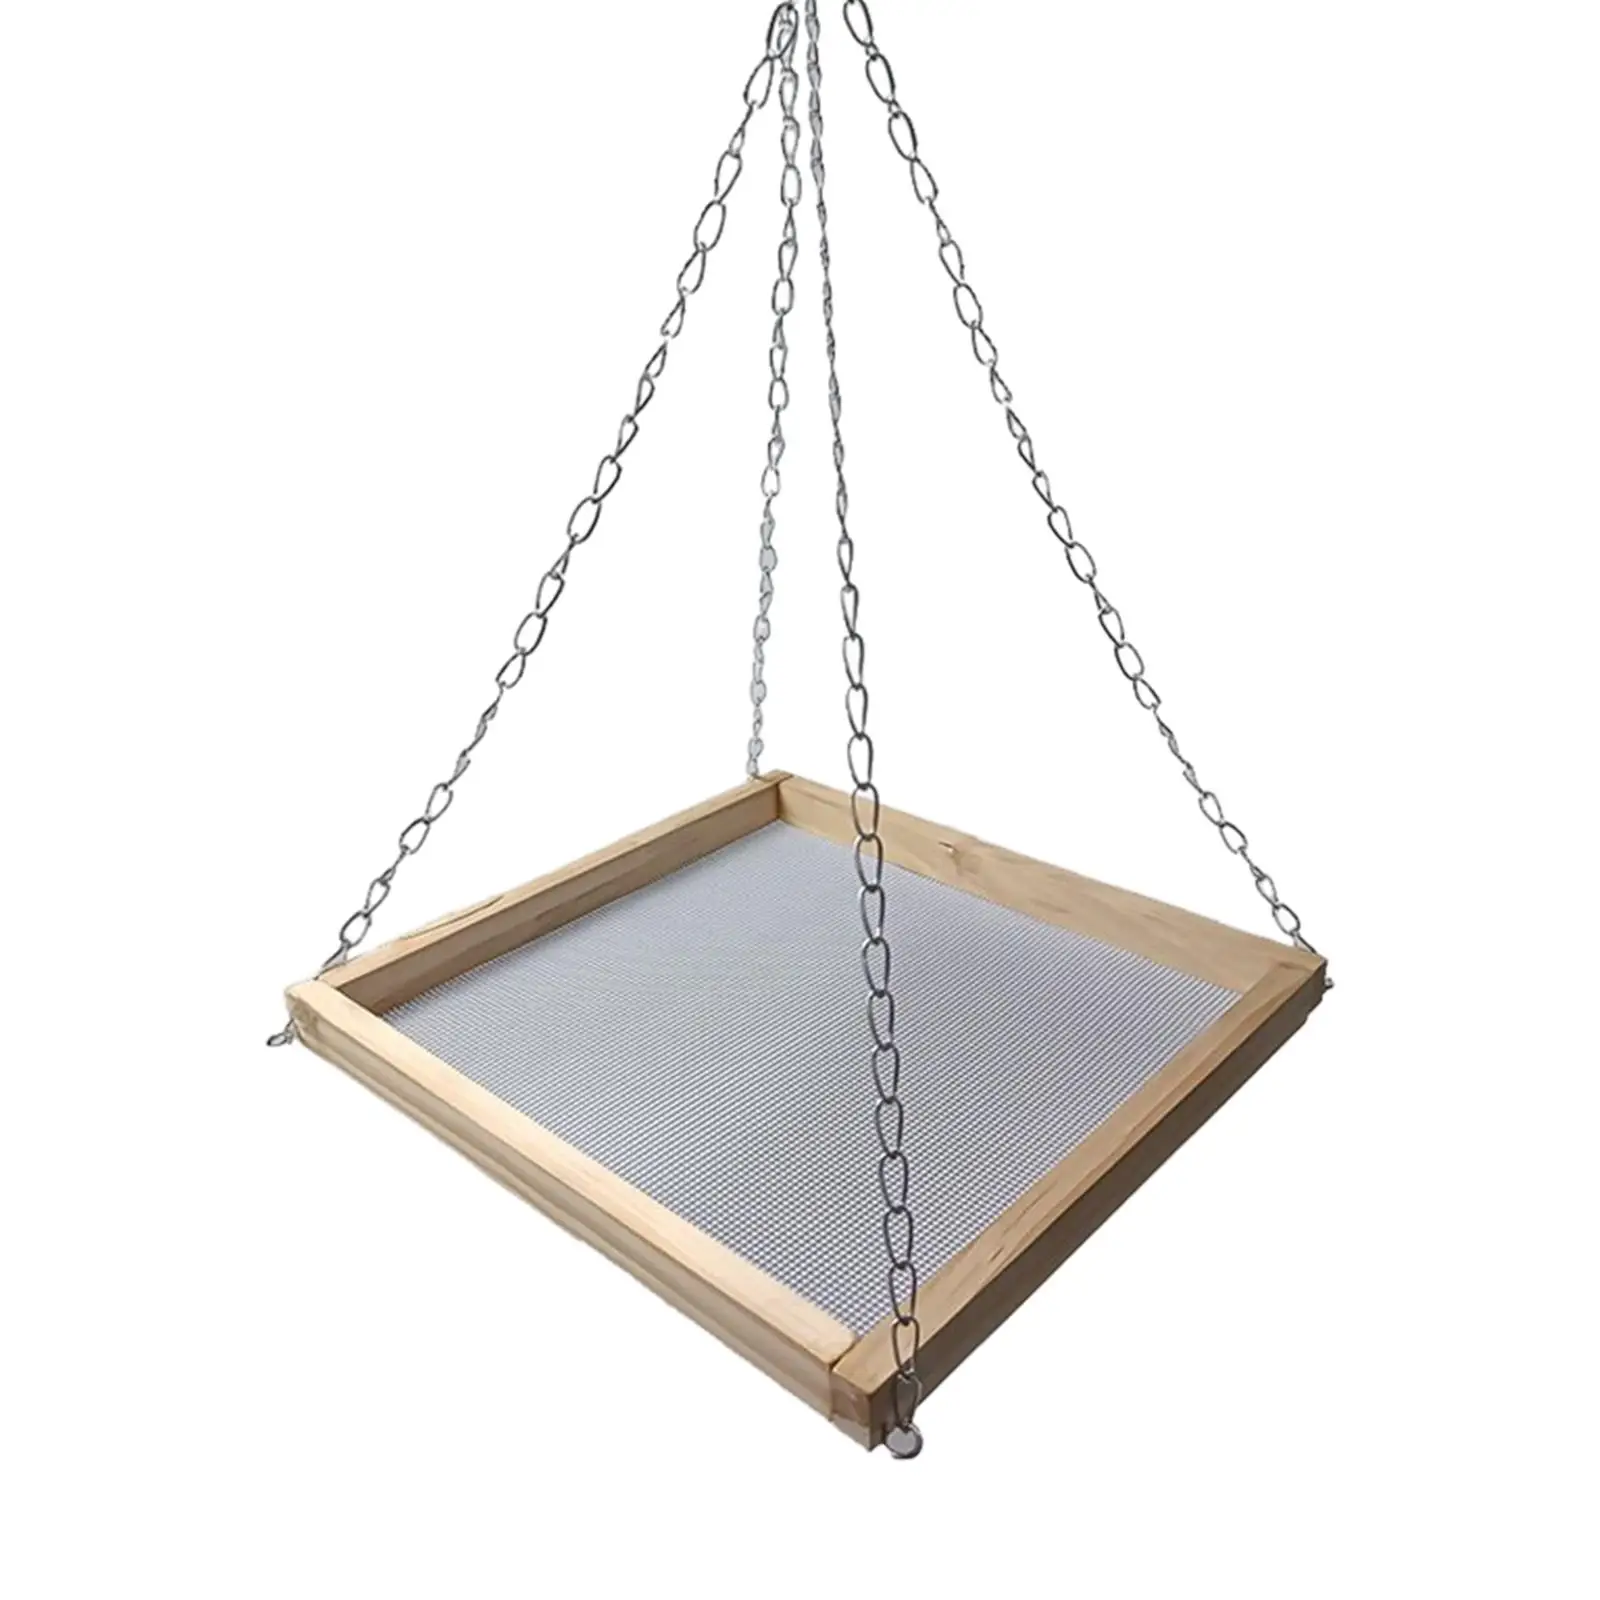 Hanging Bird Feeder Dish Strong Chains Seed Tray Food Holder Wooden Frame for Patio Outdoor Yard Outside Attracting Birds